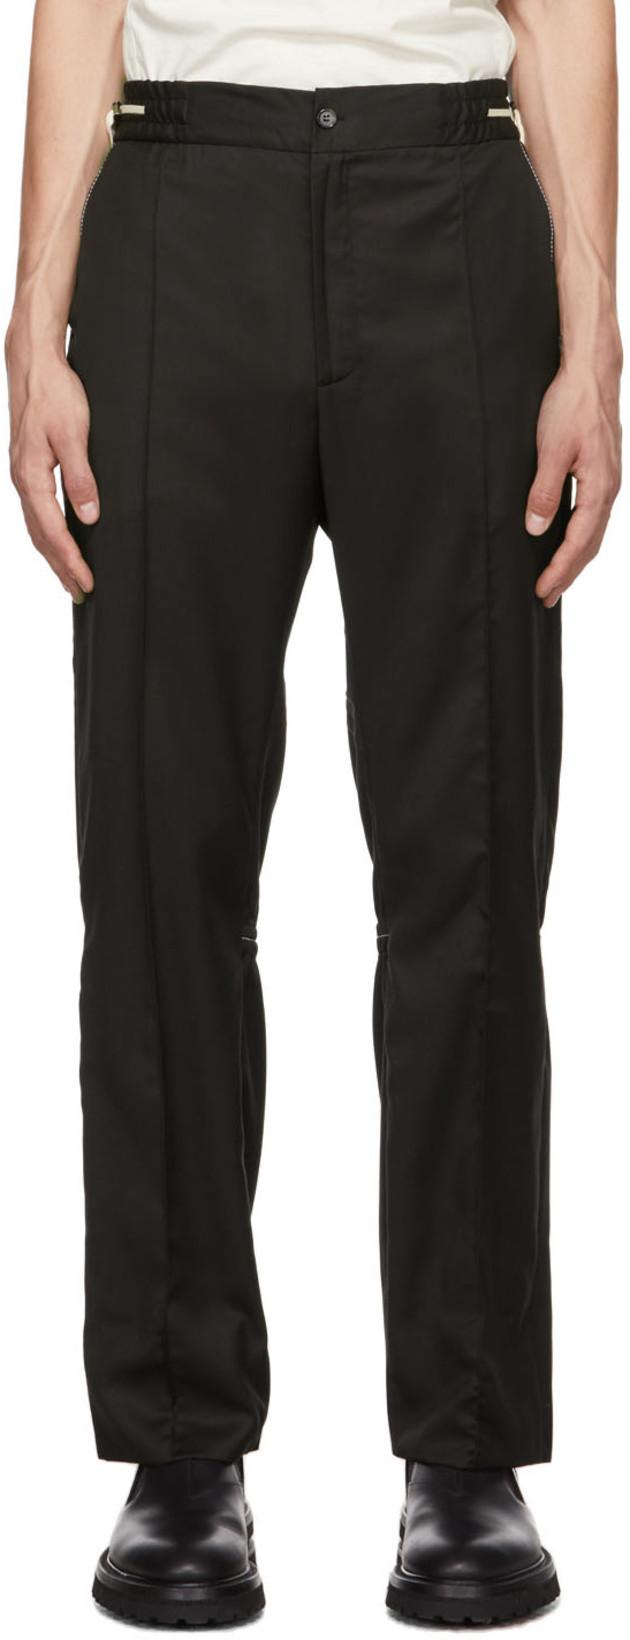 SSENSE Exclusive Black Knit Trousers by ADYAR